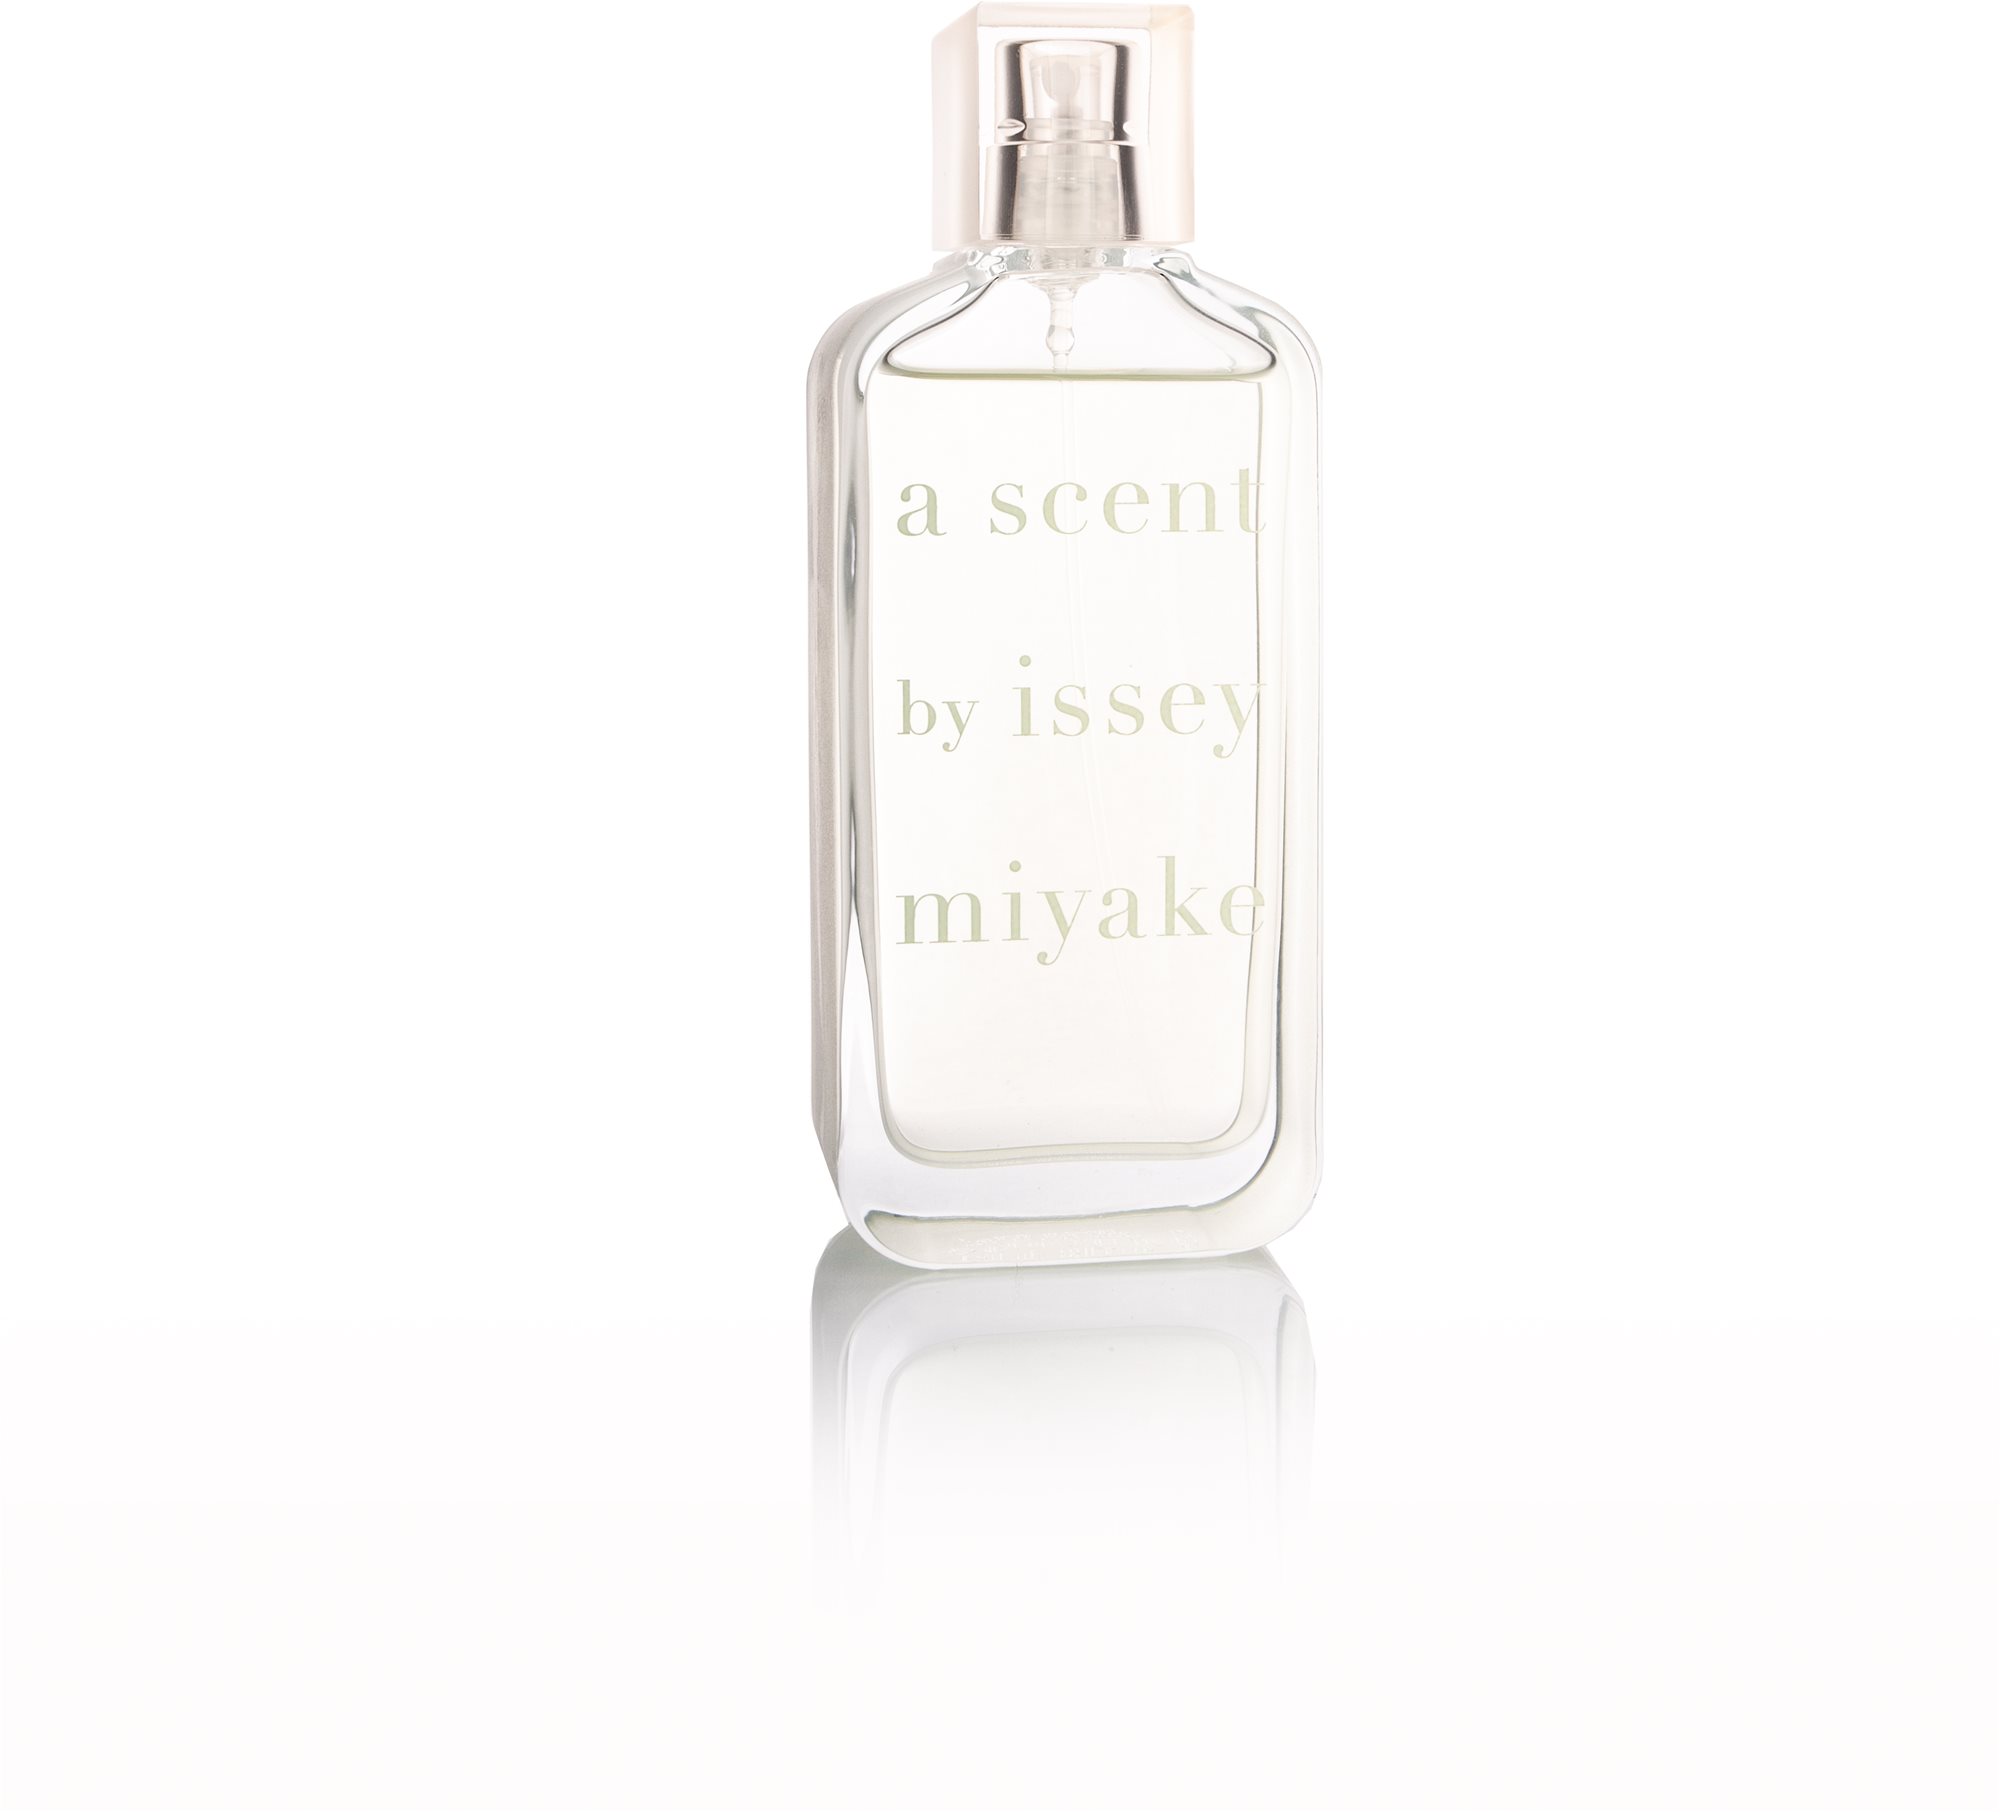 Issey Miyake A Scent by Issey Miyake 100 ml